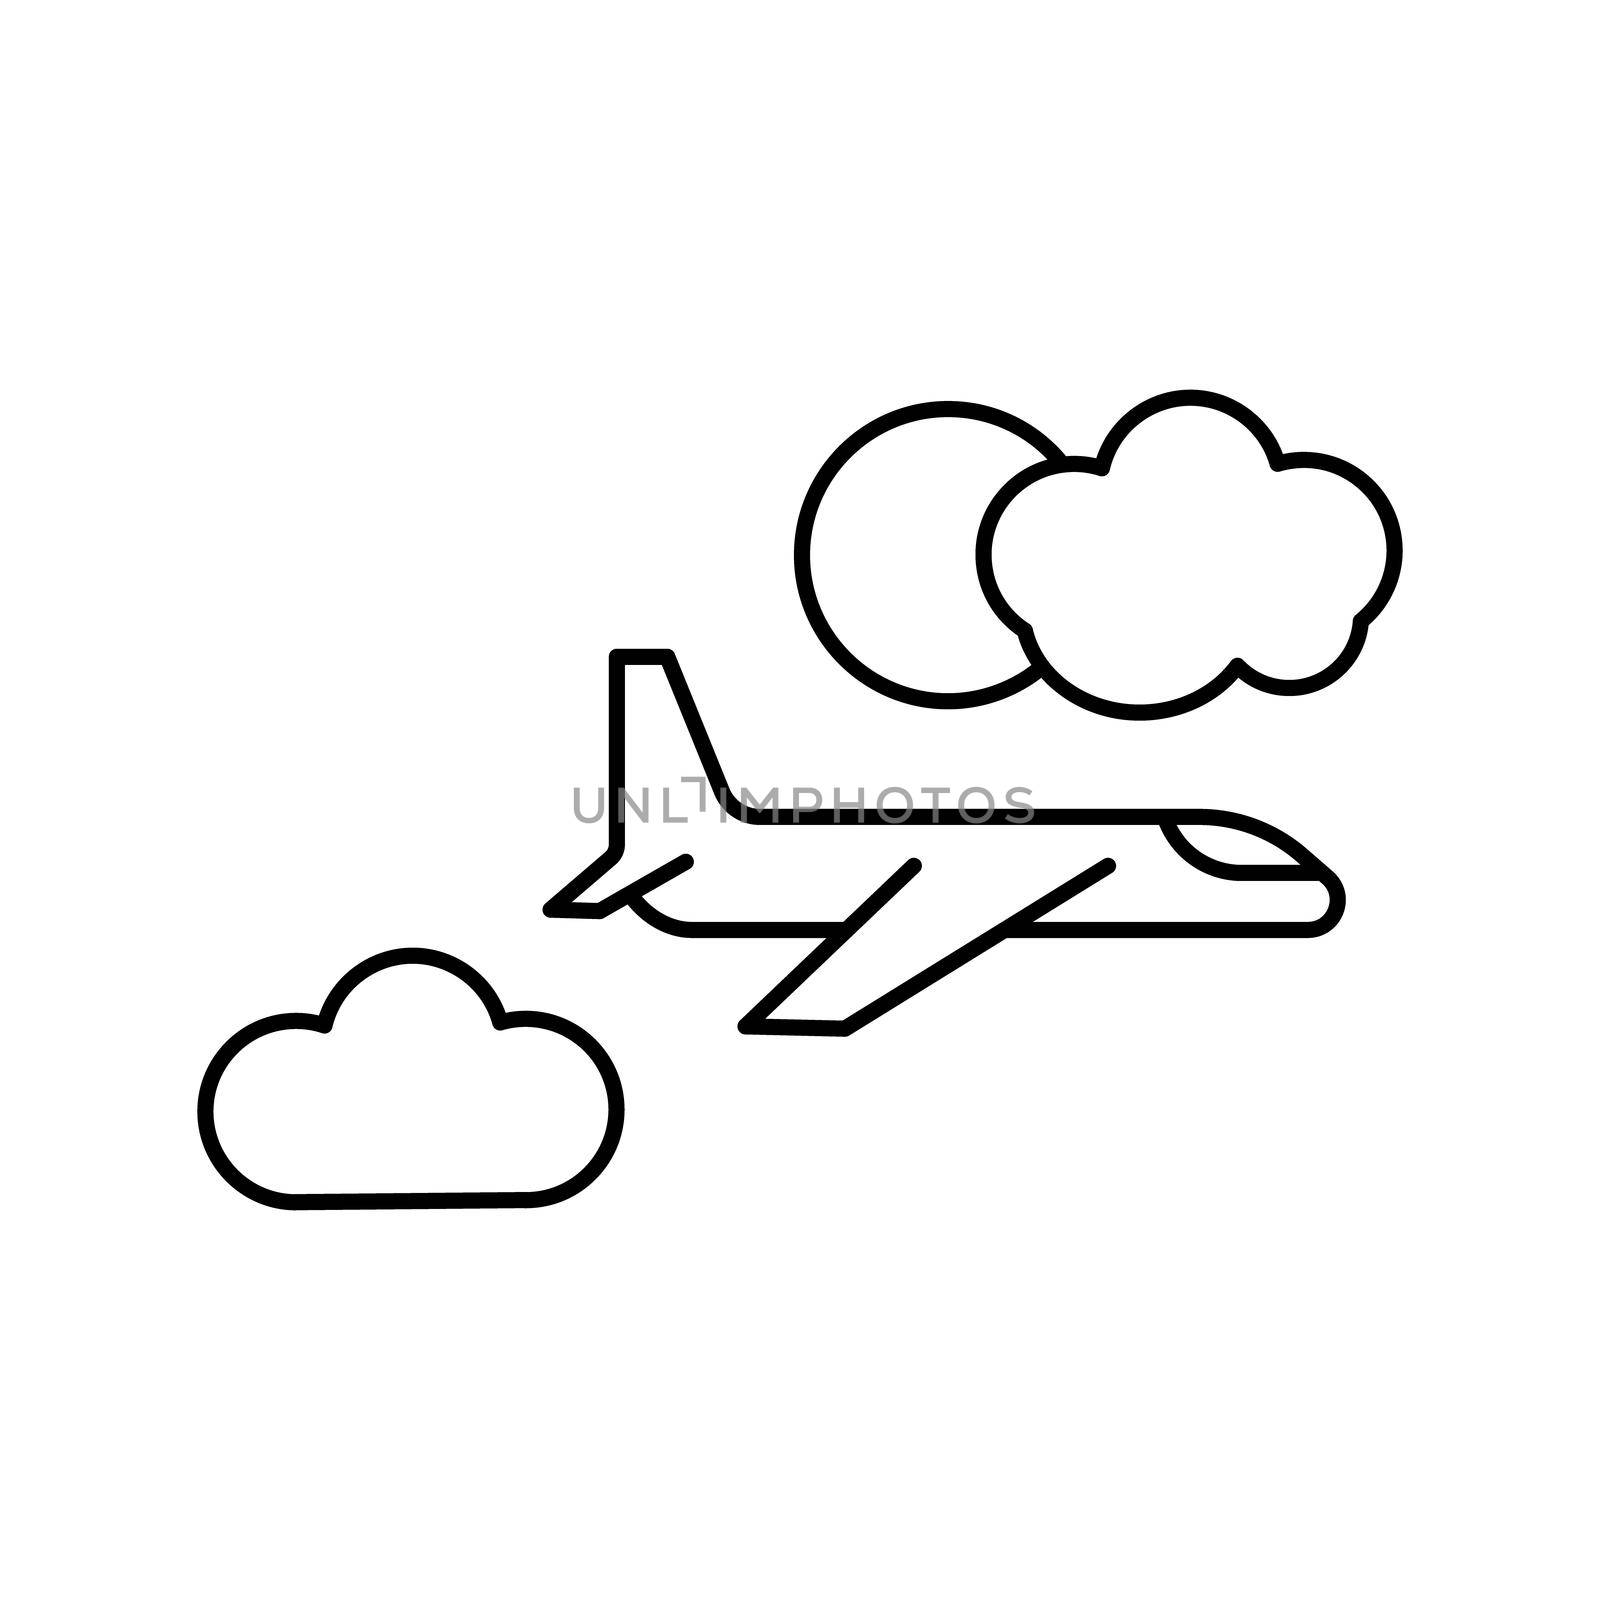 travel, flight, plane line icon. elements of airport, travel illustration icons. signs, symbols can be used for web, logo, mobile app, UI, UX by fidaneagle